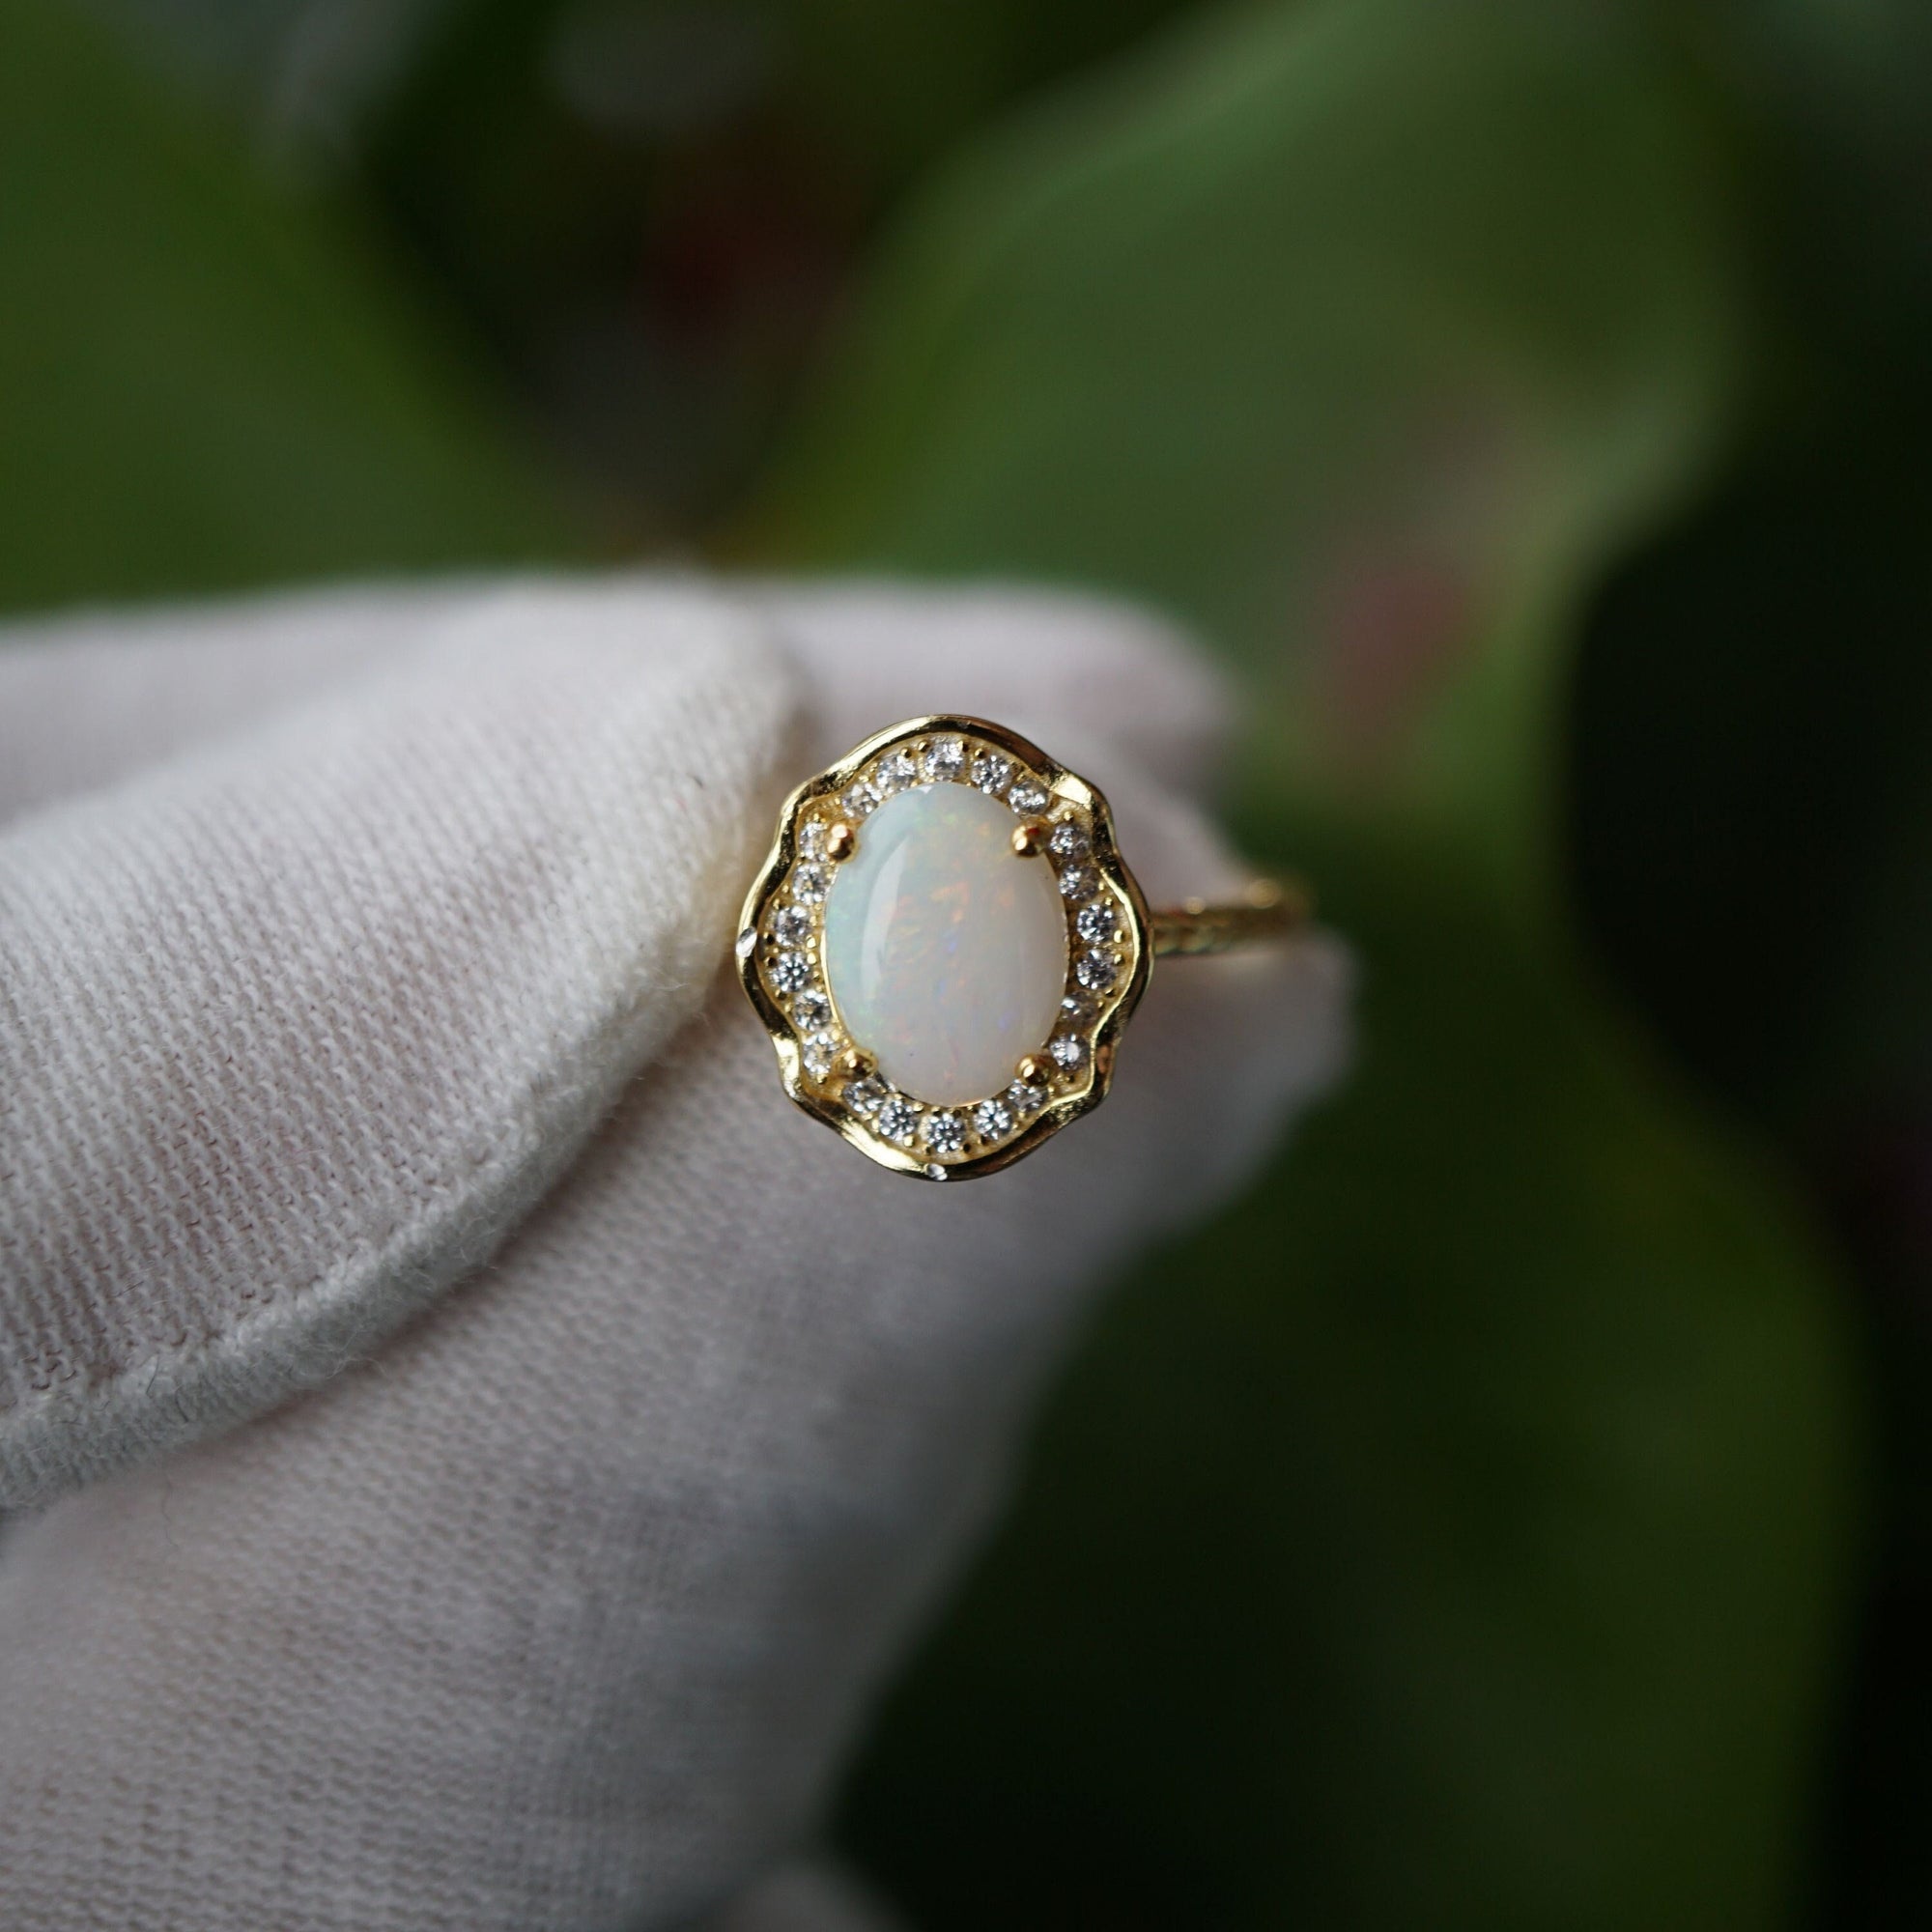 Exquisite Australian Crystal Opal Ring-Vsabel Jewellery